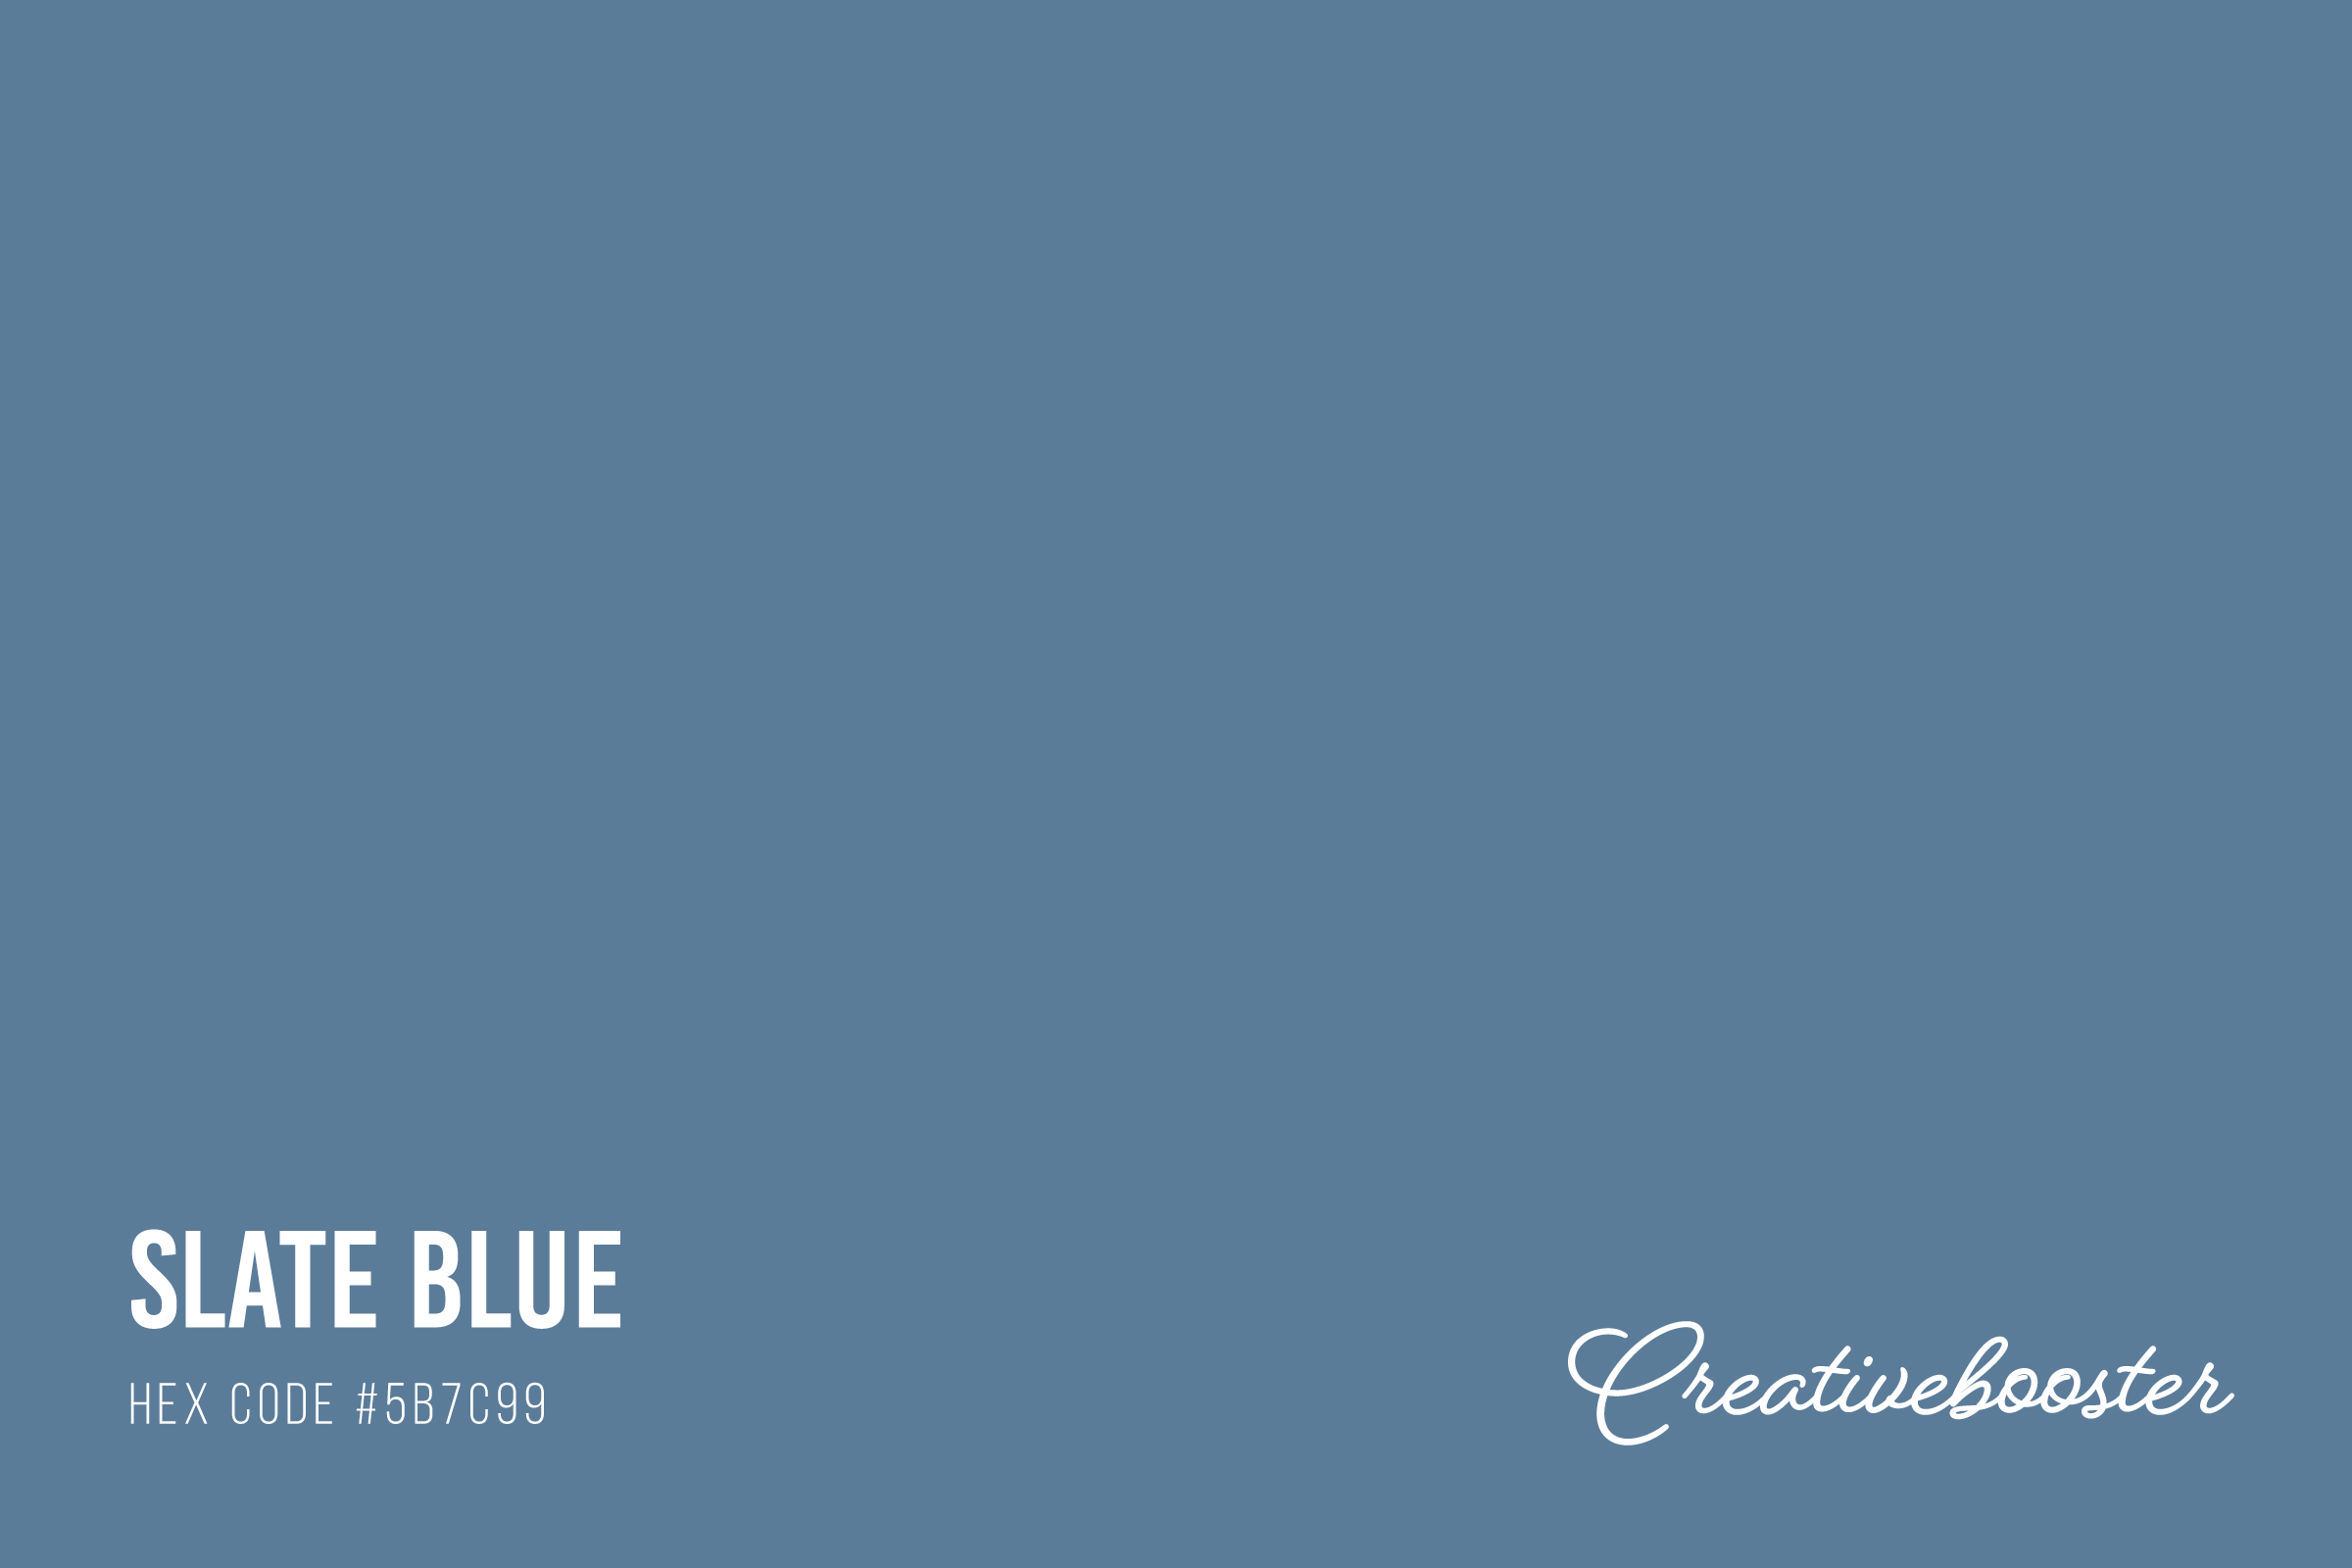 All About Color Slate Blue (Codes, Meaning and Pairings) – CreativeBooster